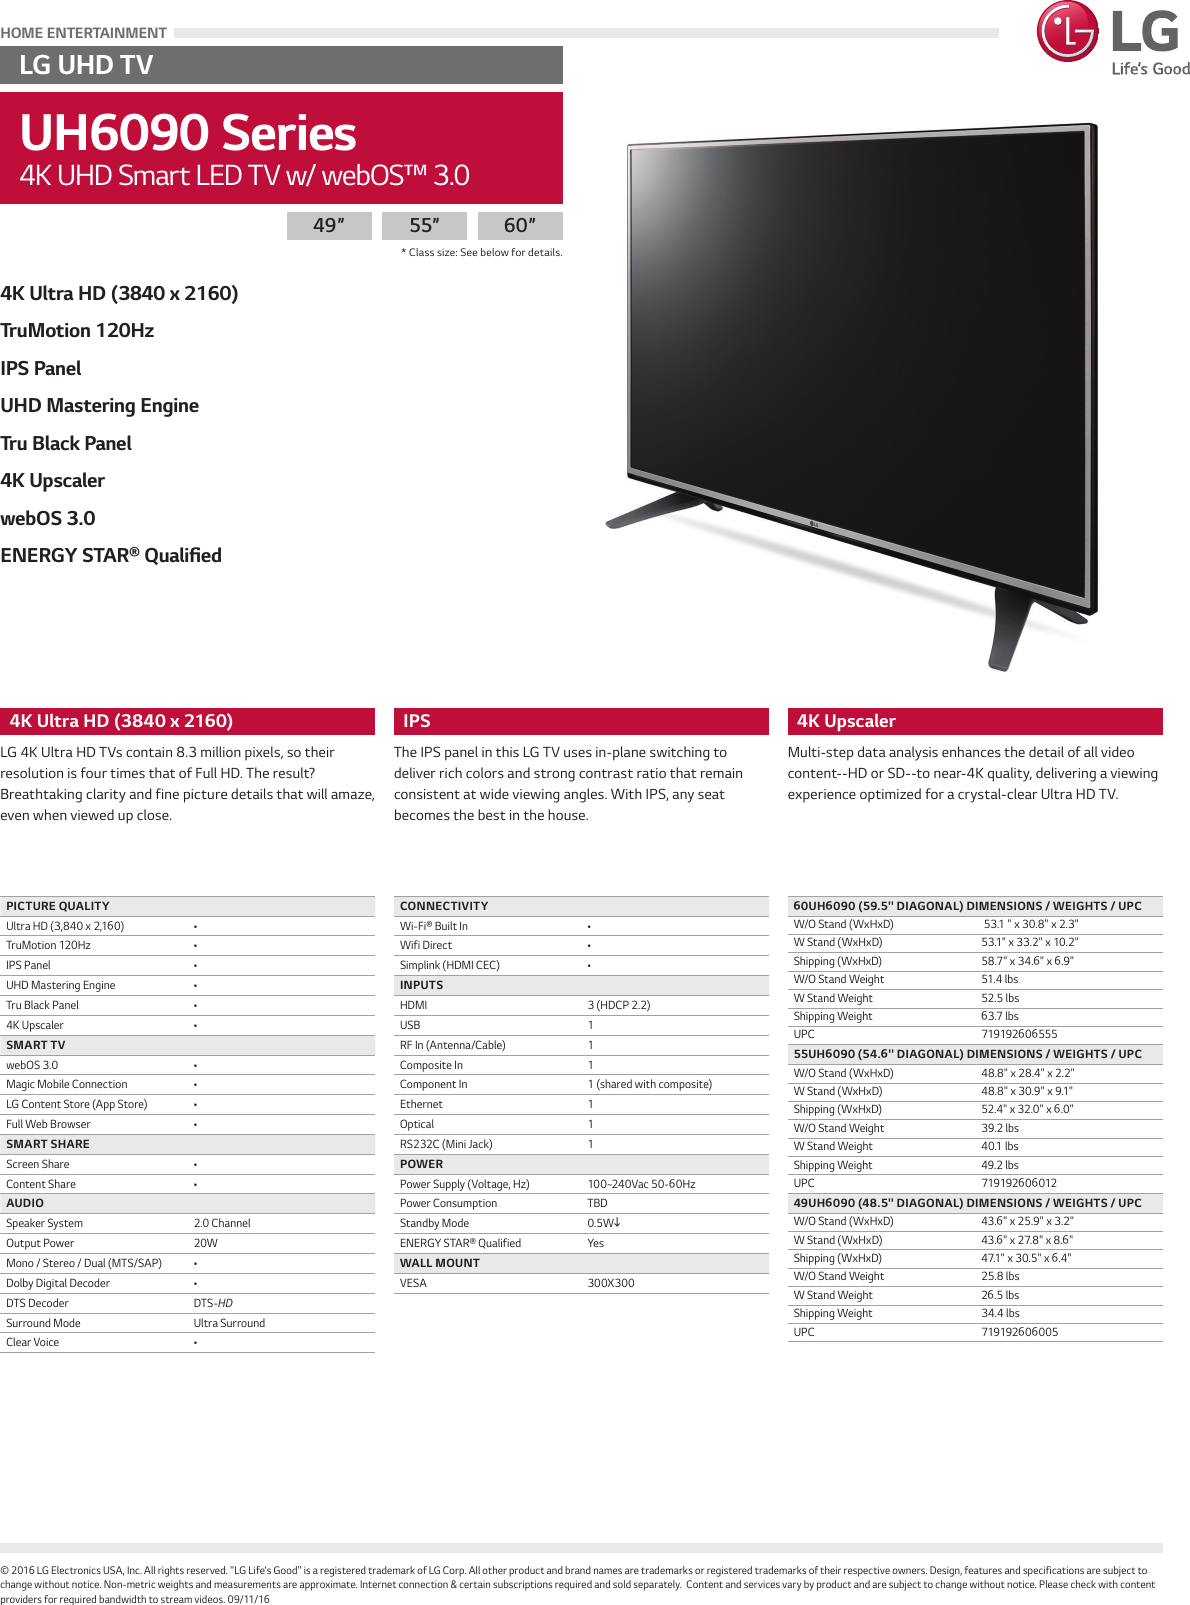 Page 1 of 1 - LG 55UH6090 User Manual Specification UH6090 Series Spec Sheet Updated 10112016